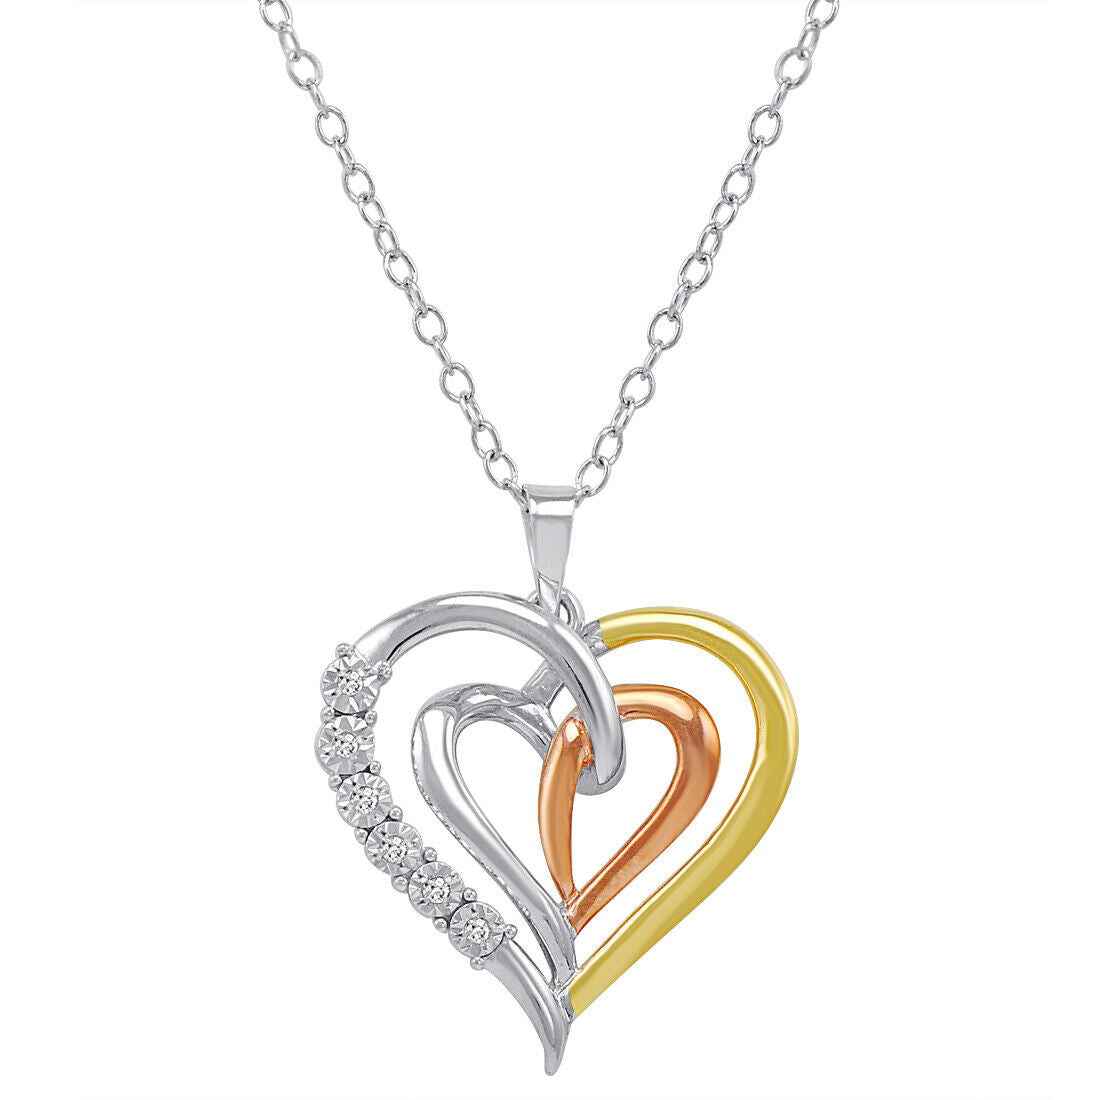 Heart in Heart Pendant-Necklace (925 Stirling Silver)